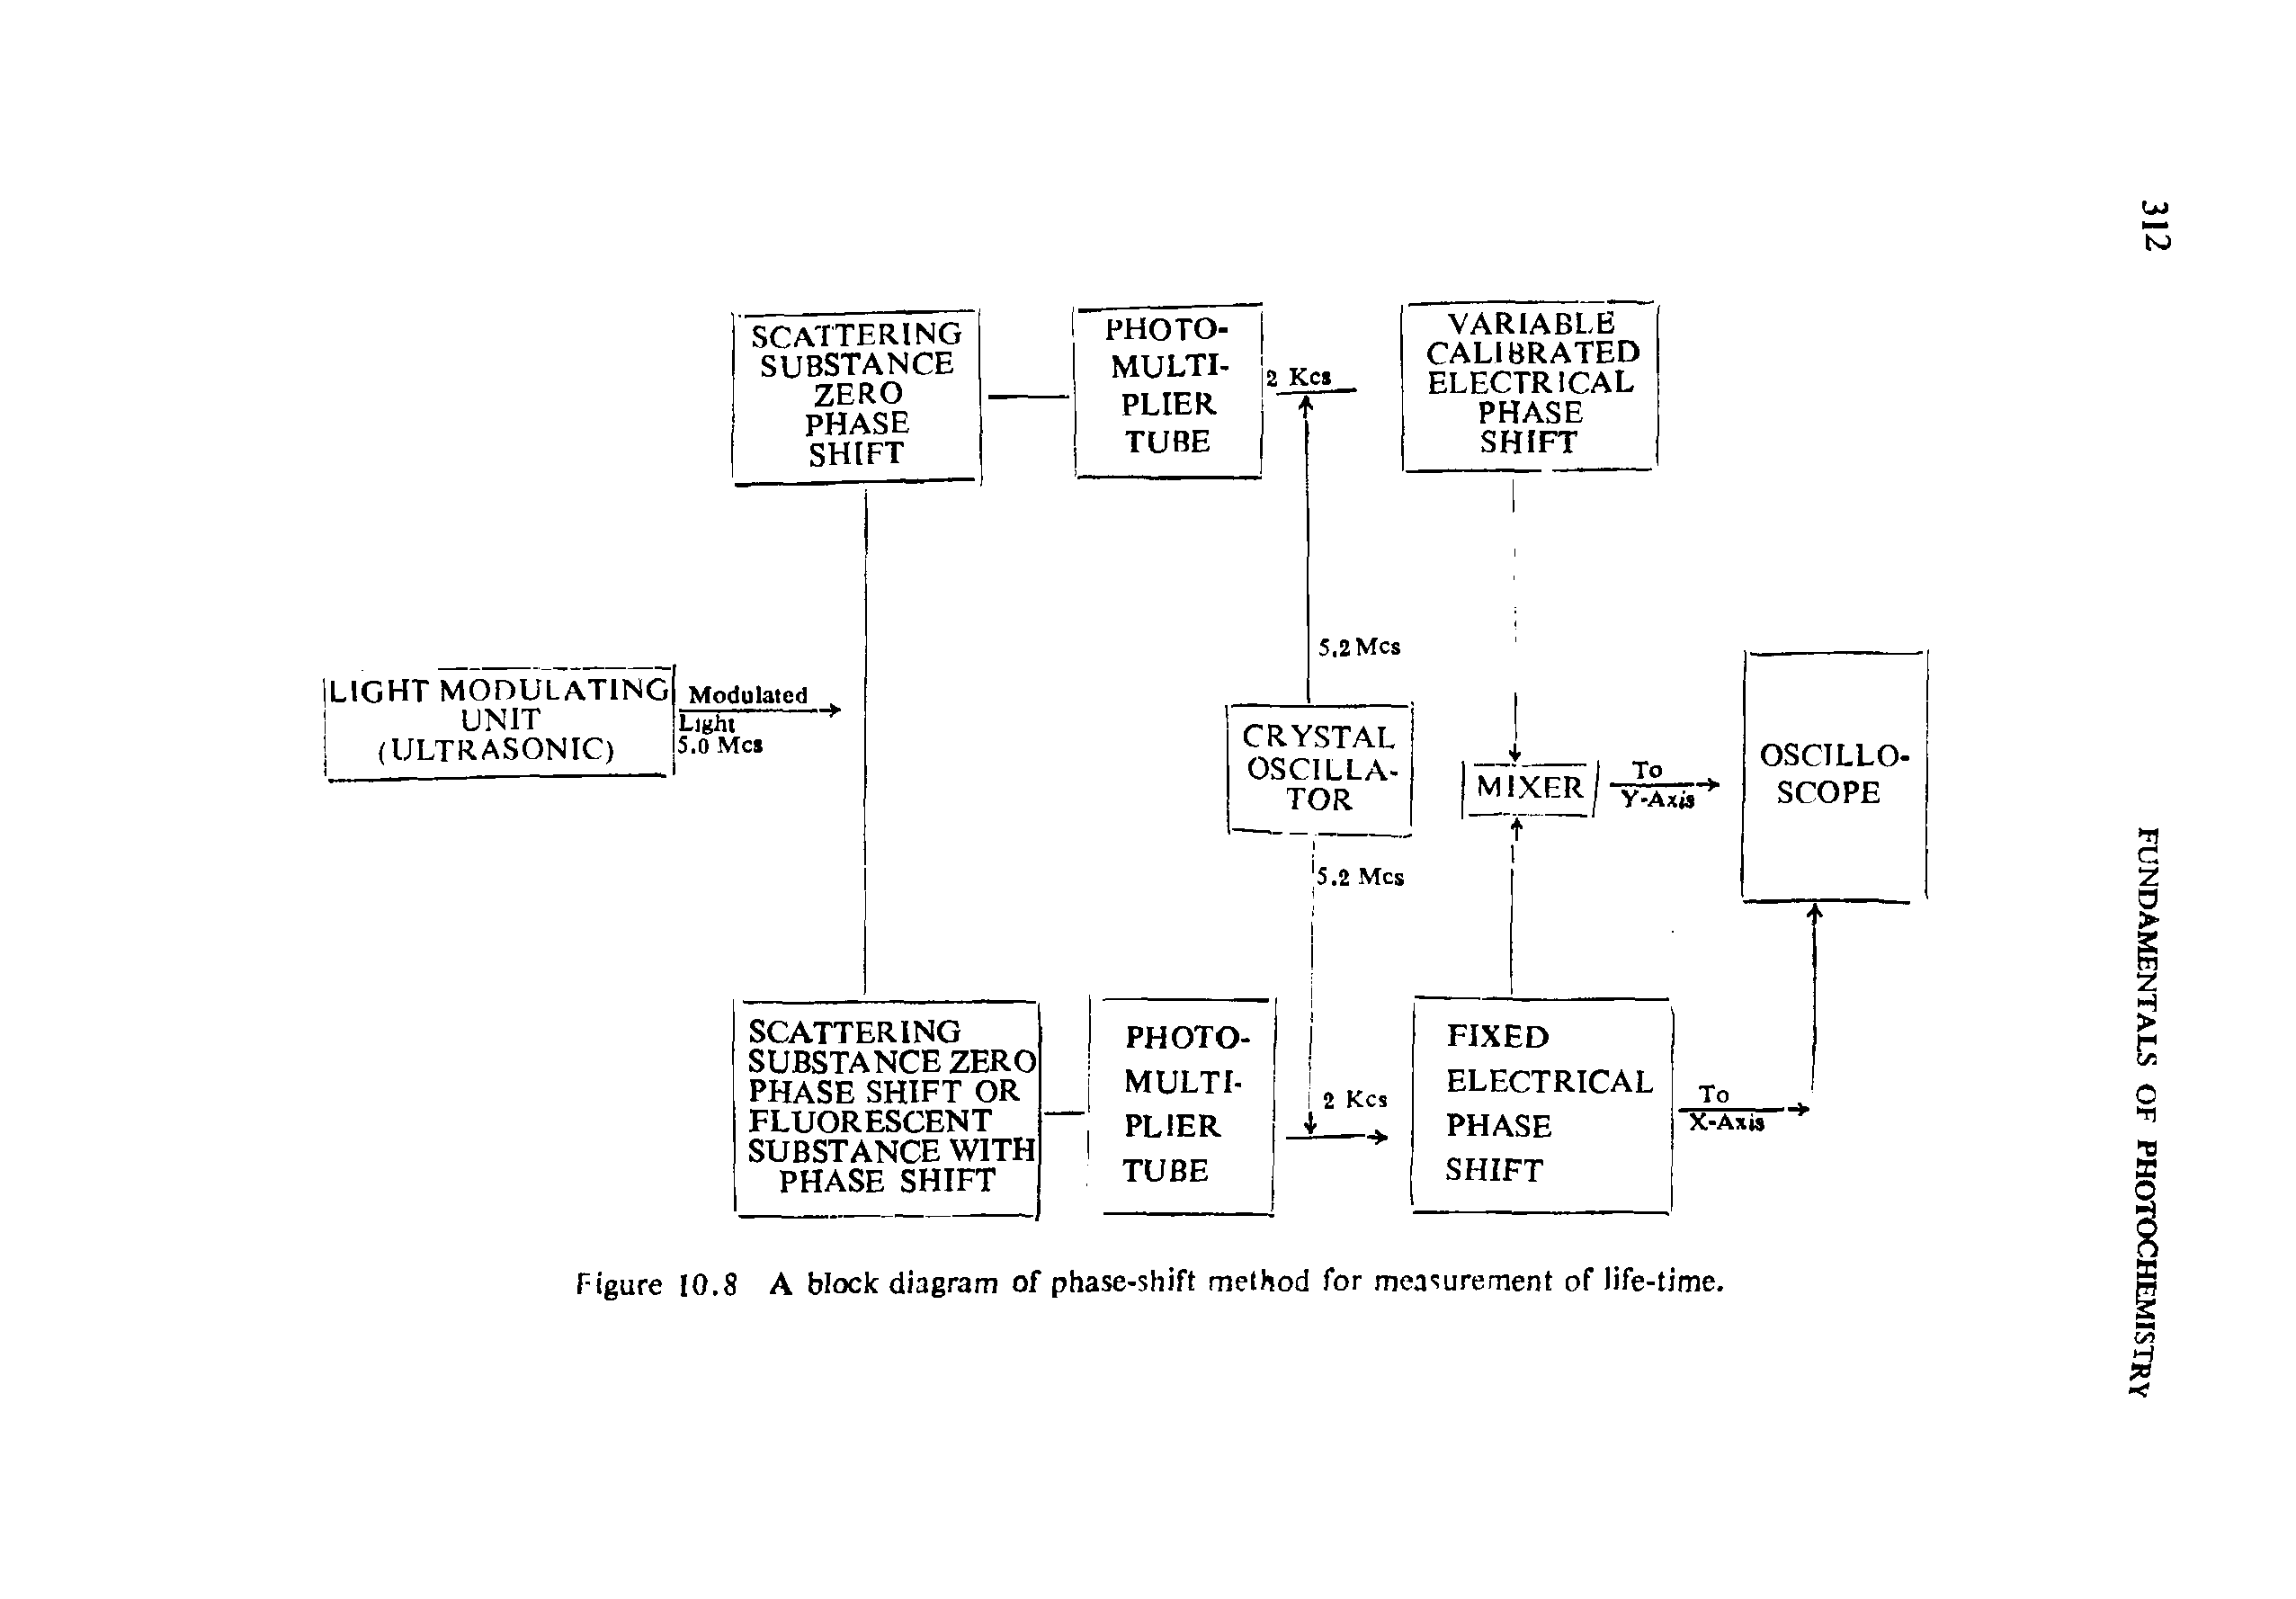 Figure 10.8 A block diagram of phase-shift method for measurement of life-time.